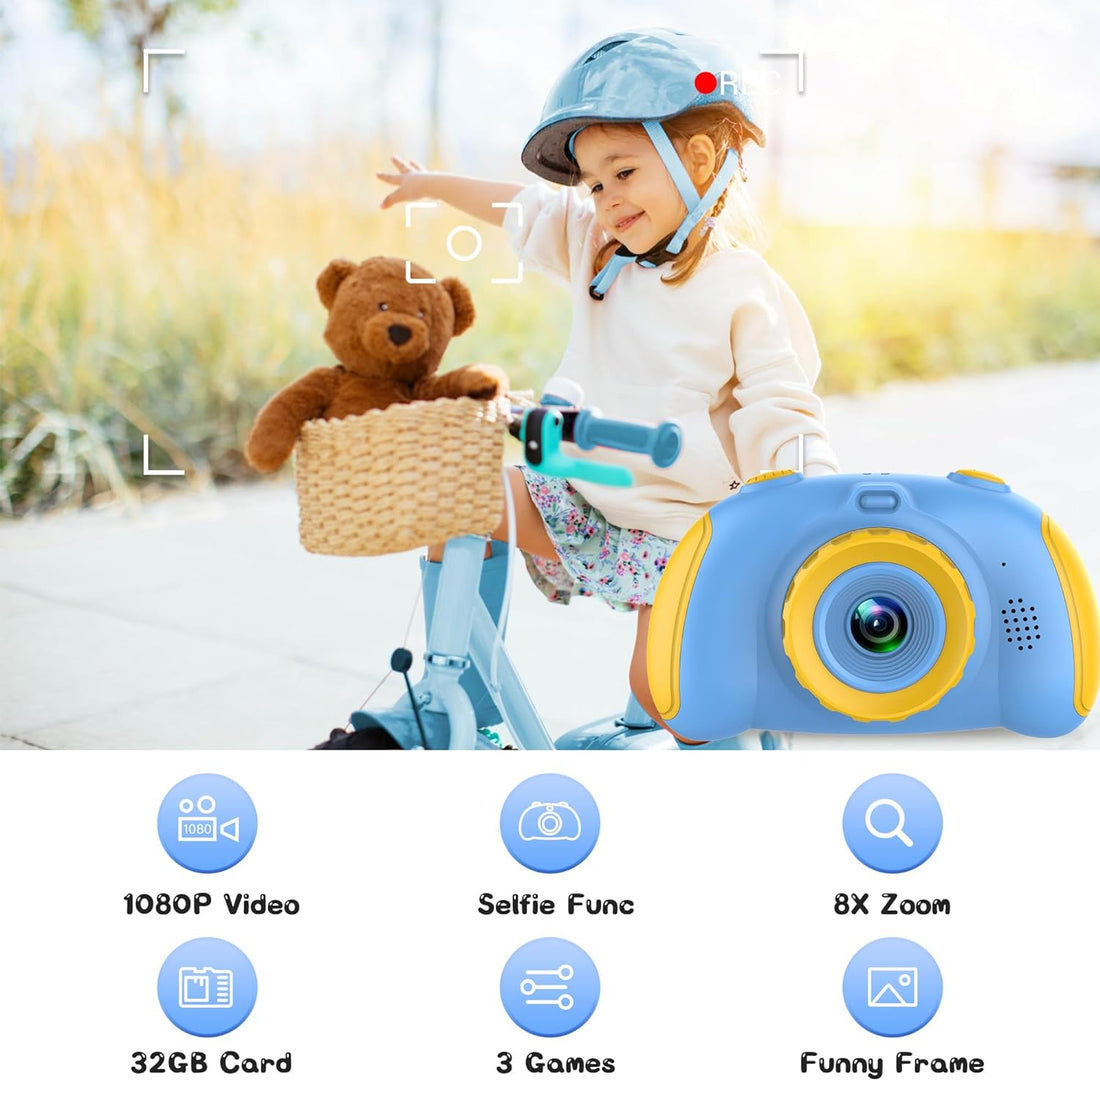 Kids Camera, Camera for Kids 3-12, Kids Digital Camera for Boys and Girls, with 32G SD Card, Toddler Camera with 2.4-Inch Screen for Kids at Birthday, Christmas (Blue with Yellow)